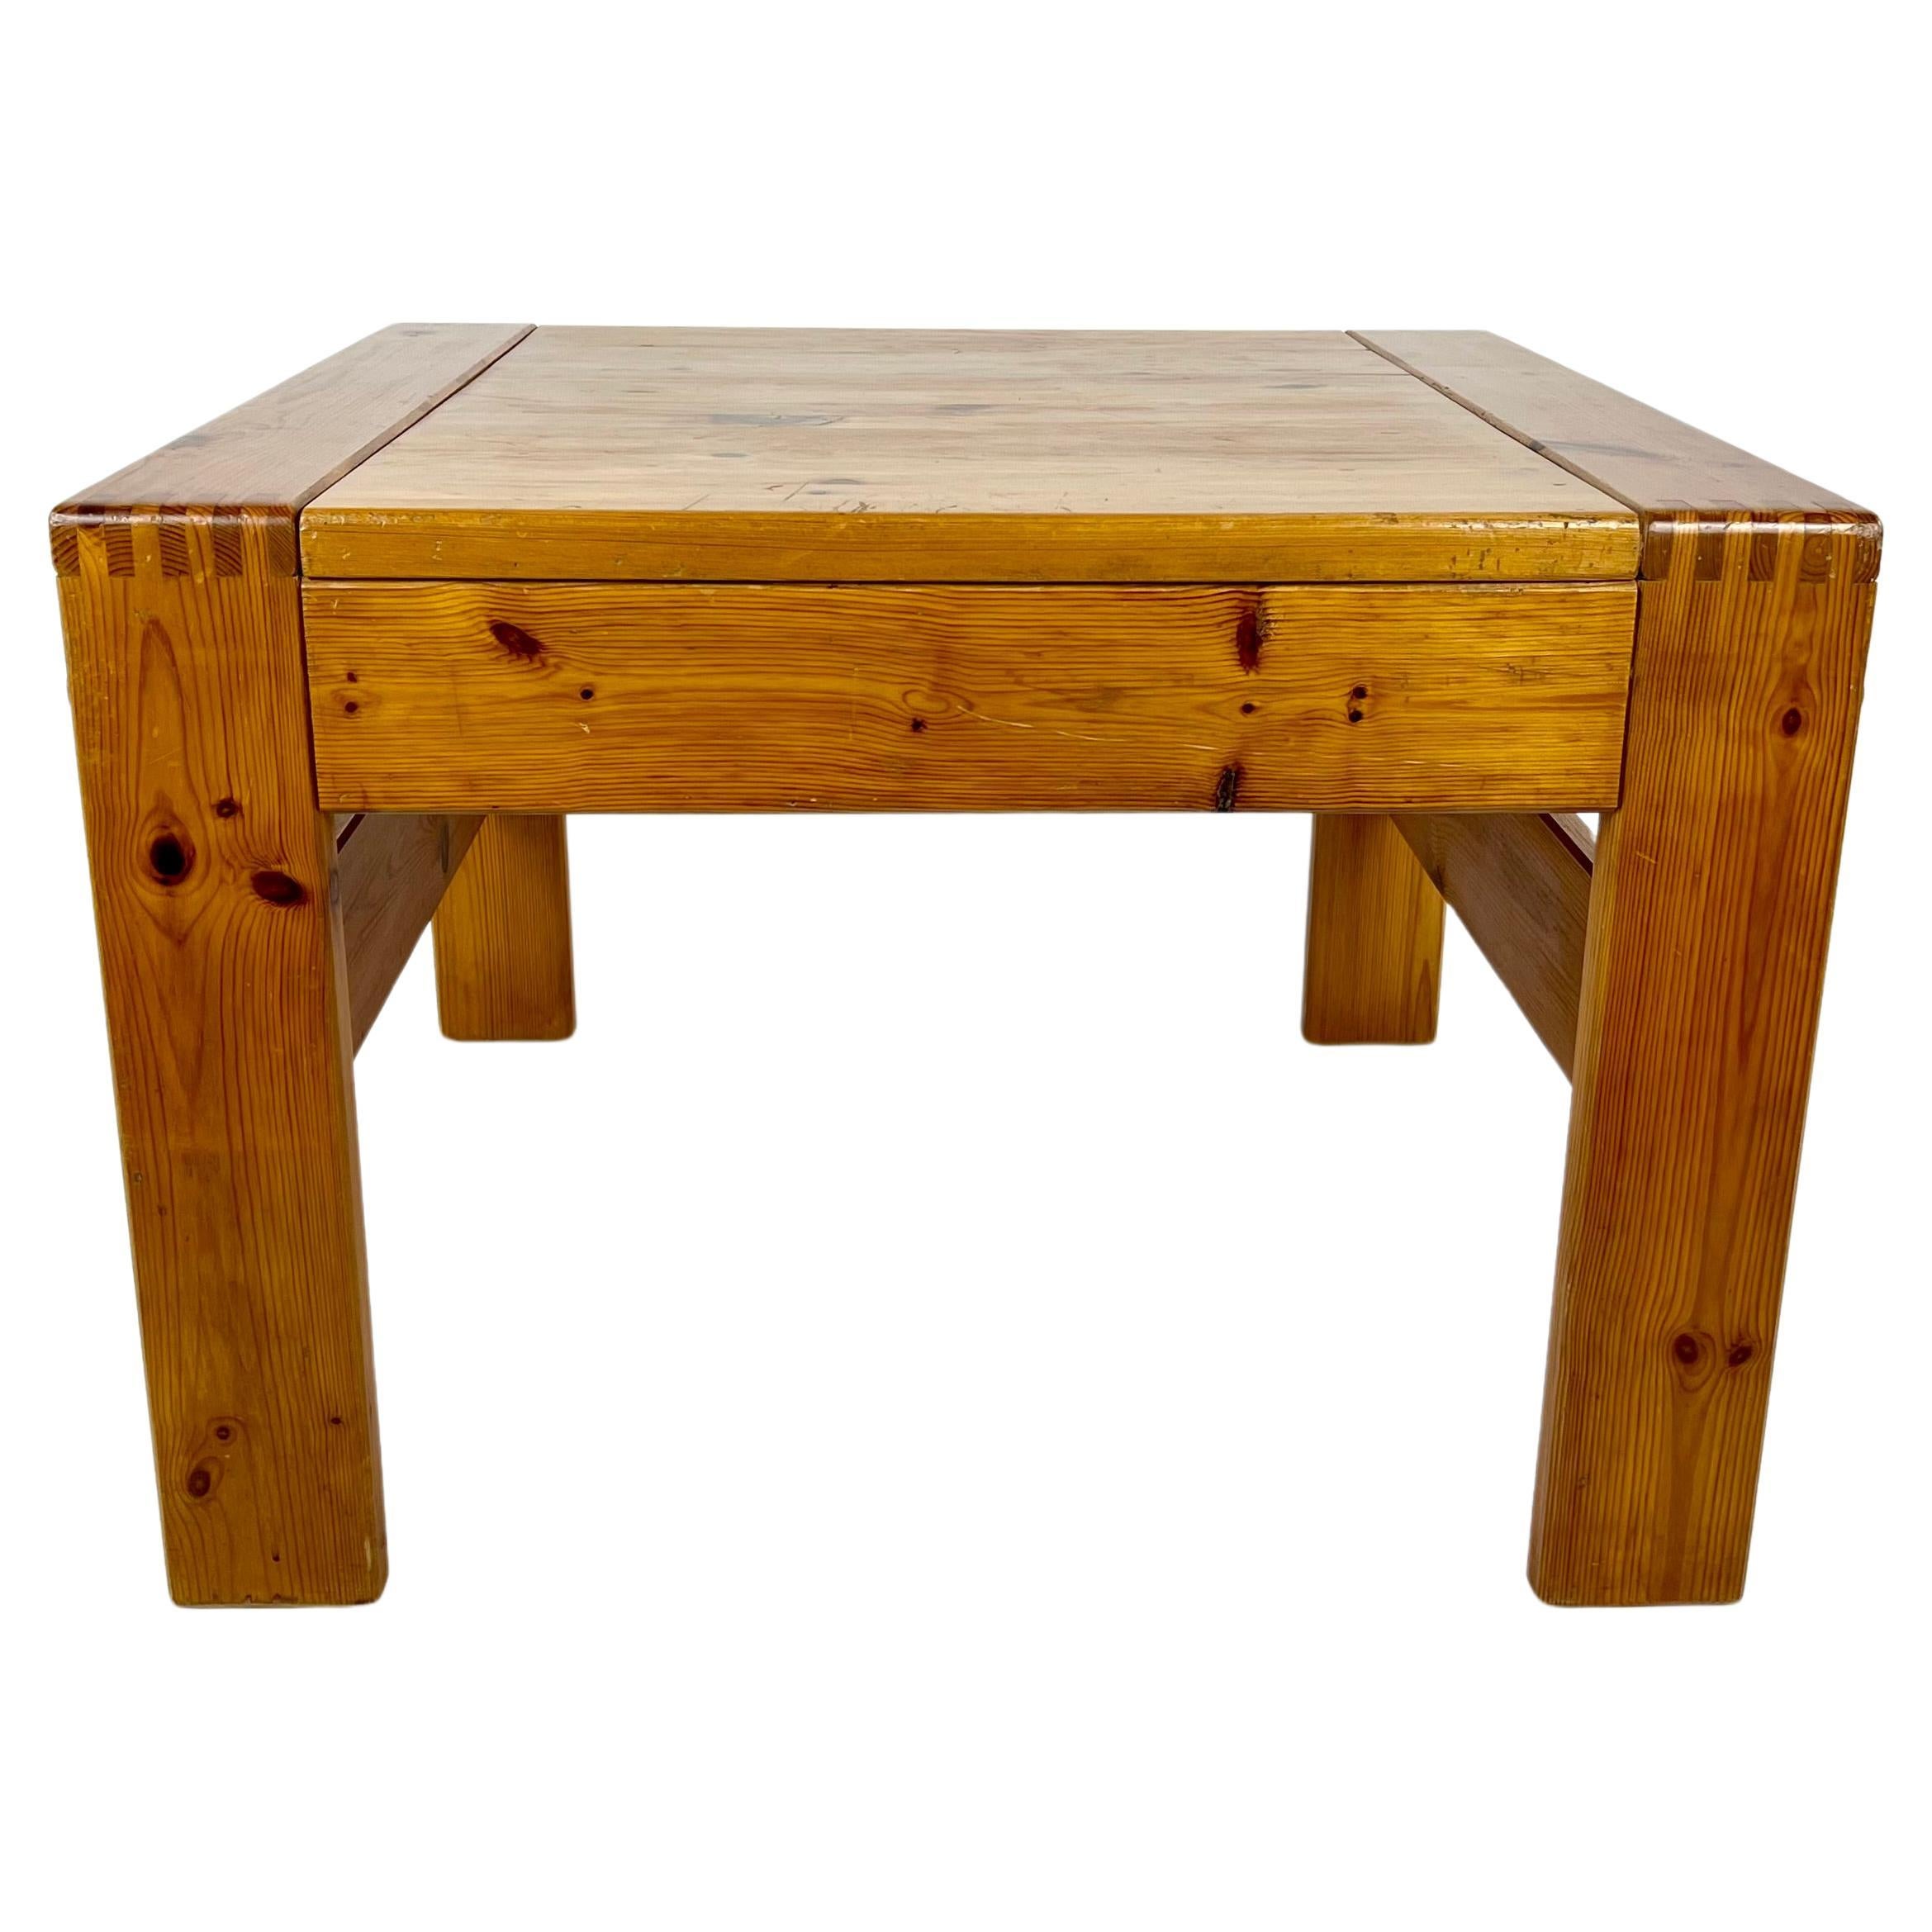 Vintage square pine coffee table, France 1970s